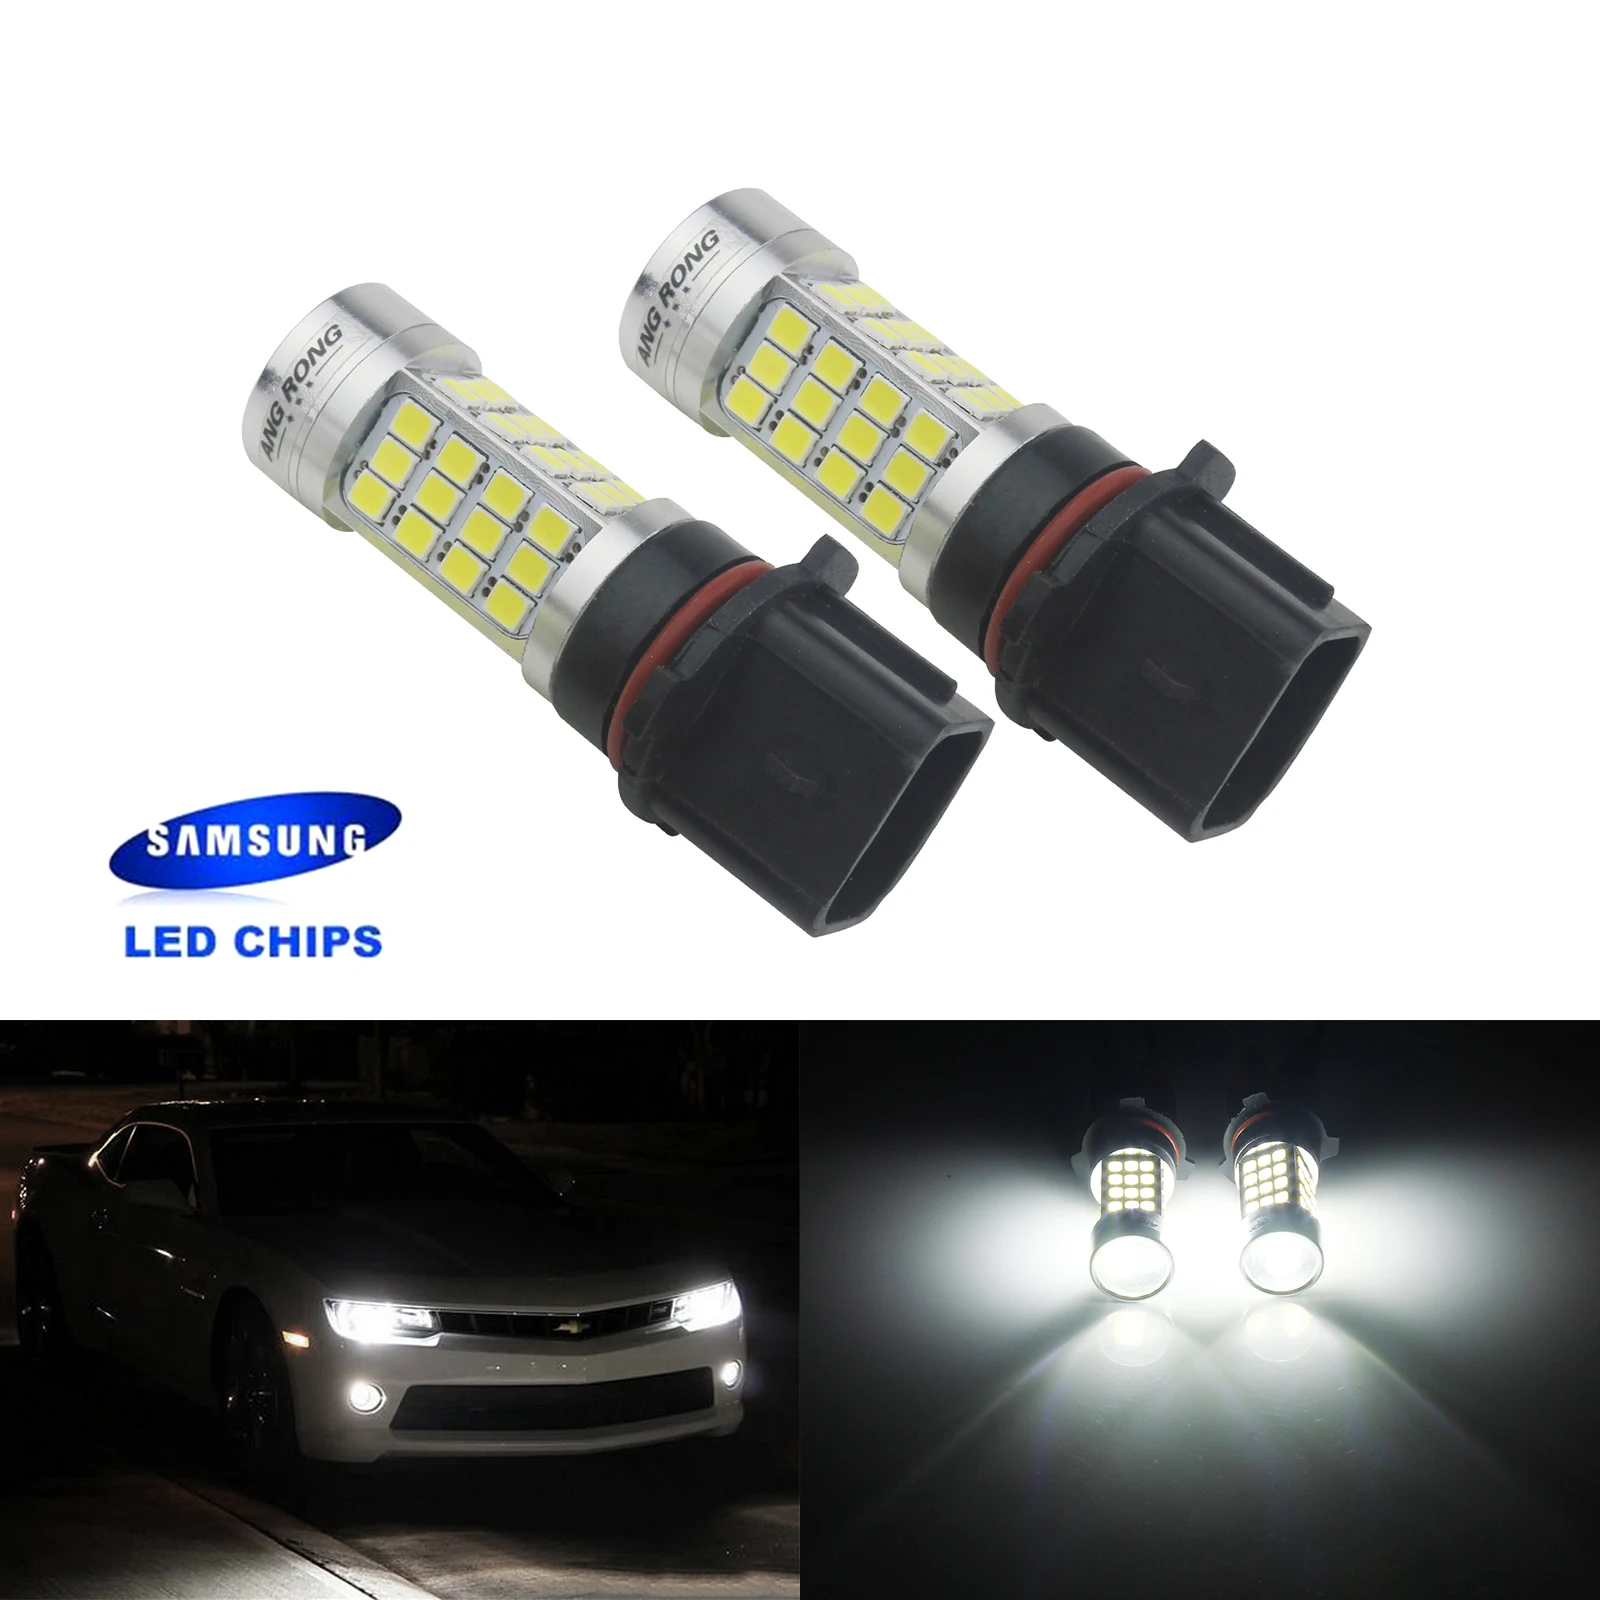 2xHigh Power White 18-SMD 5050 P13W LED Bulbs For Chevy Camaro Fog Light and DRL